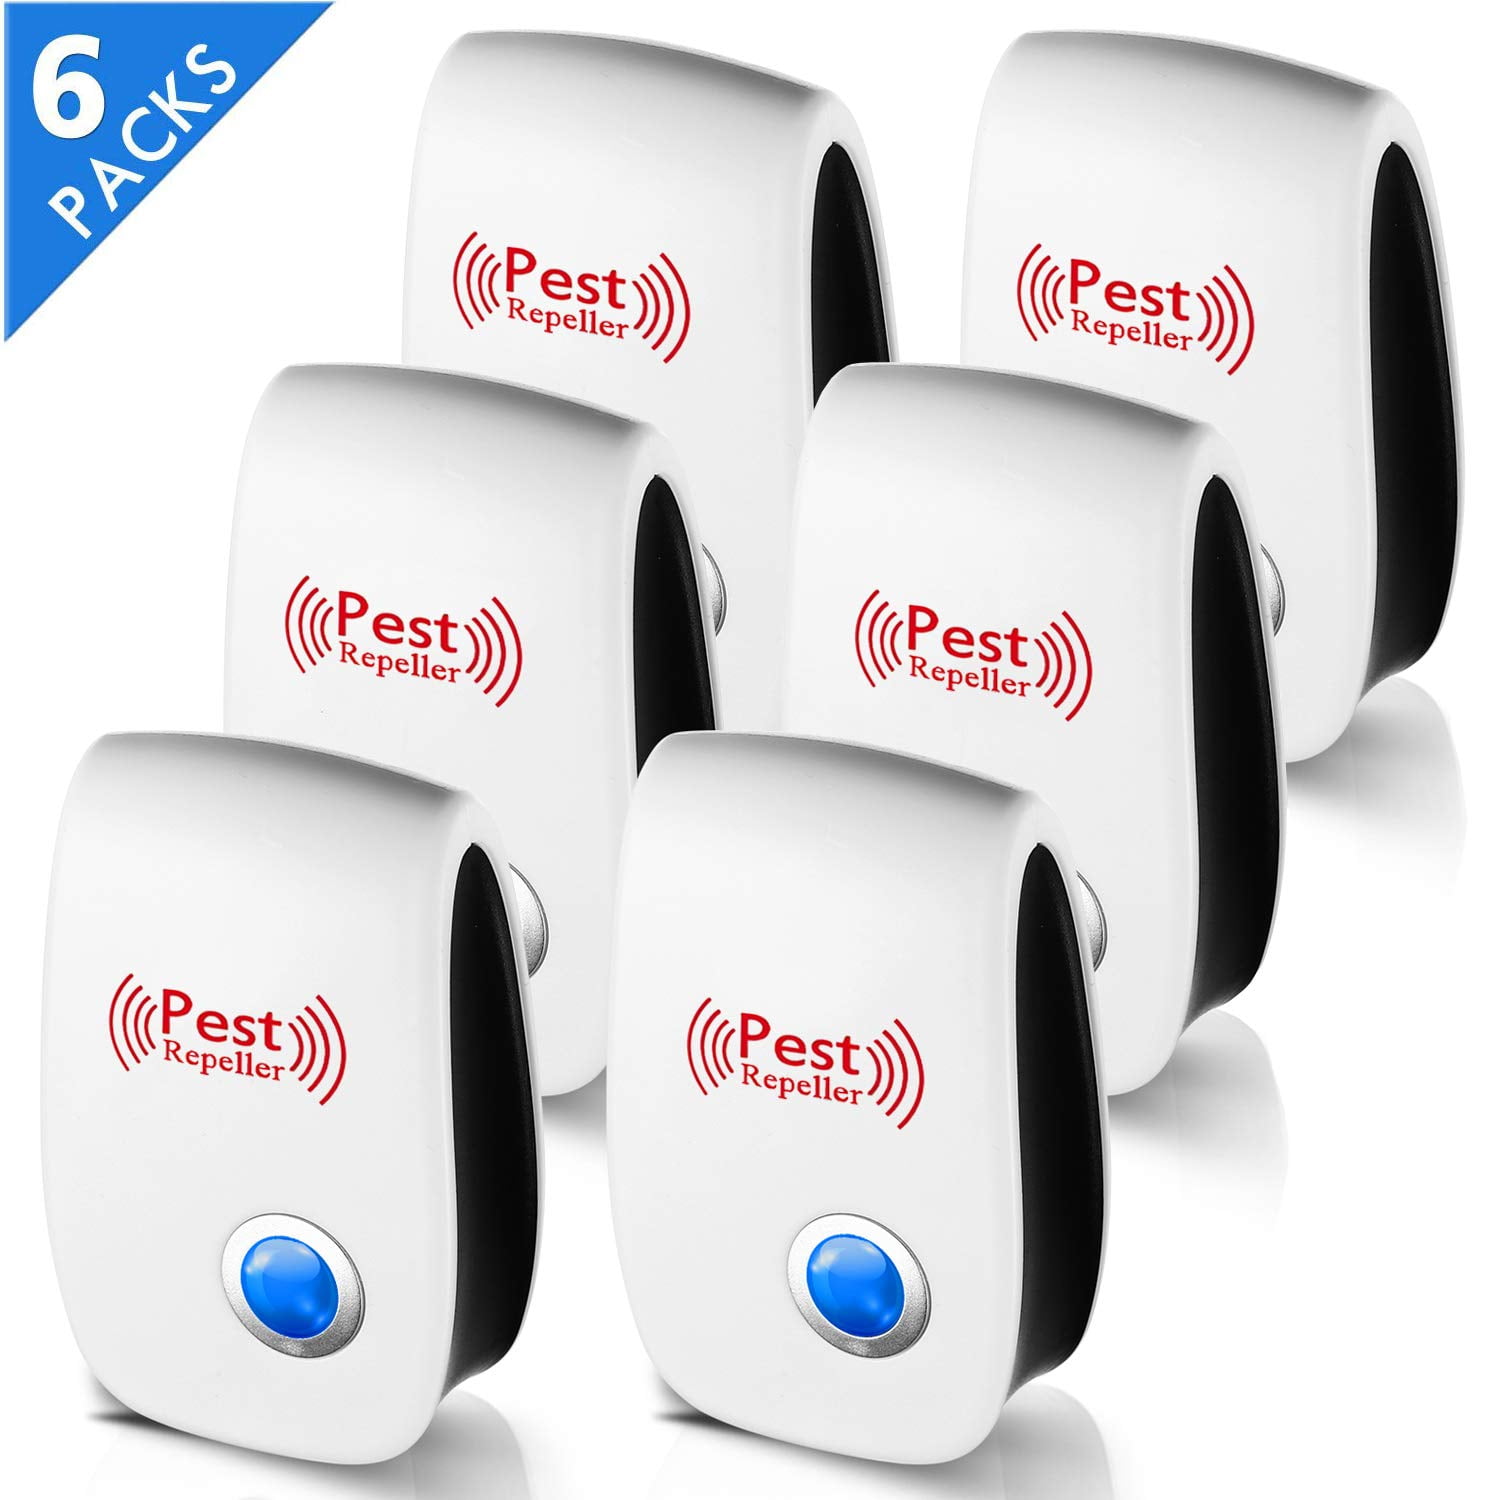 Buy 6 PACK - Ultrasonic Pest Repeller - Electronic Plug -In Pest Control  Ultrasonic - Best Repellent for Cockroach Rodents Flies Online at Lowest  Price in Ubuy India. 650086530